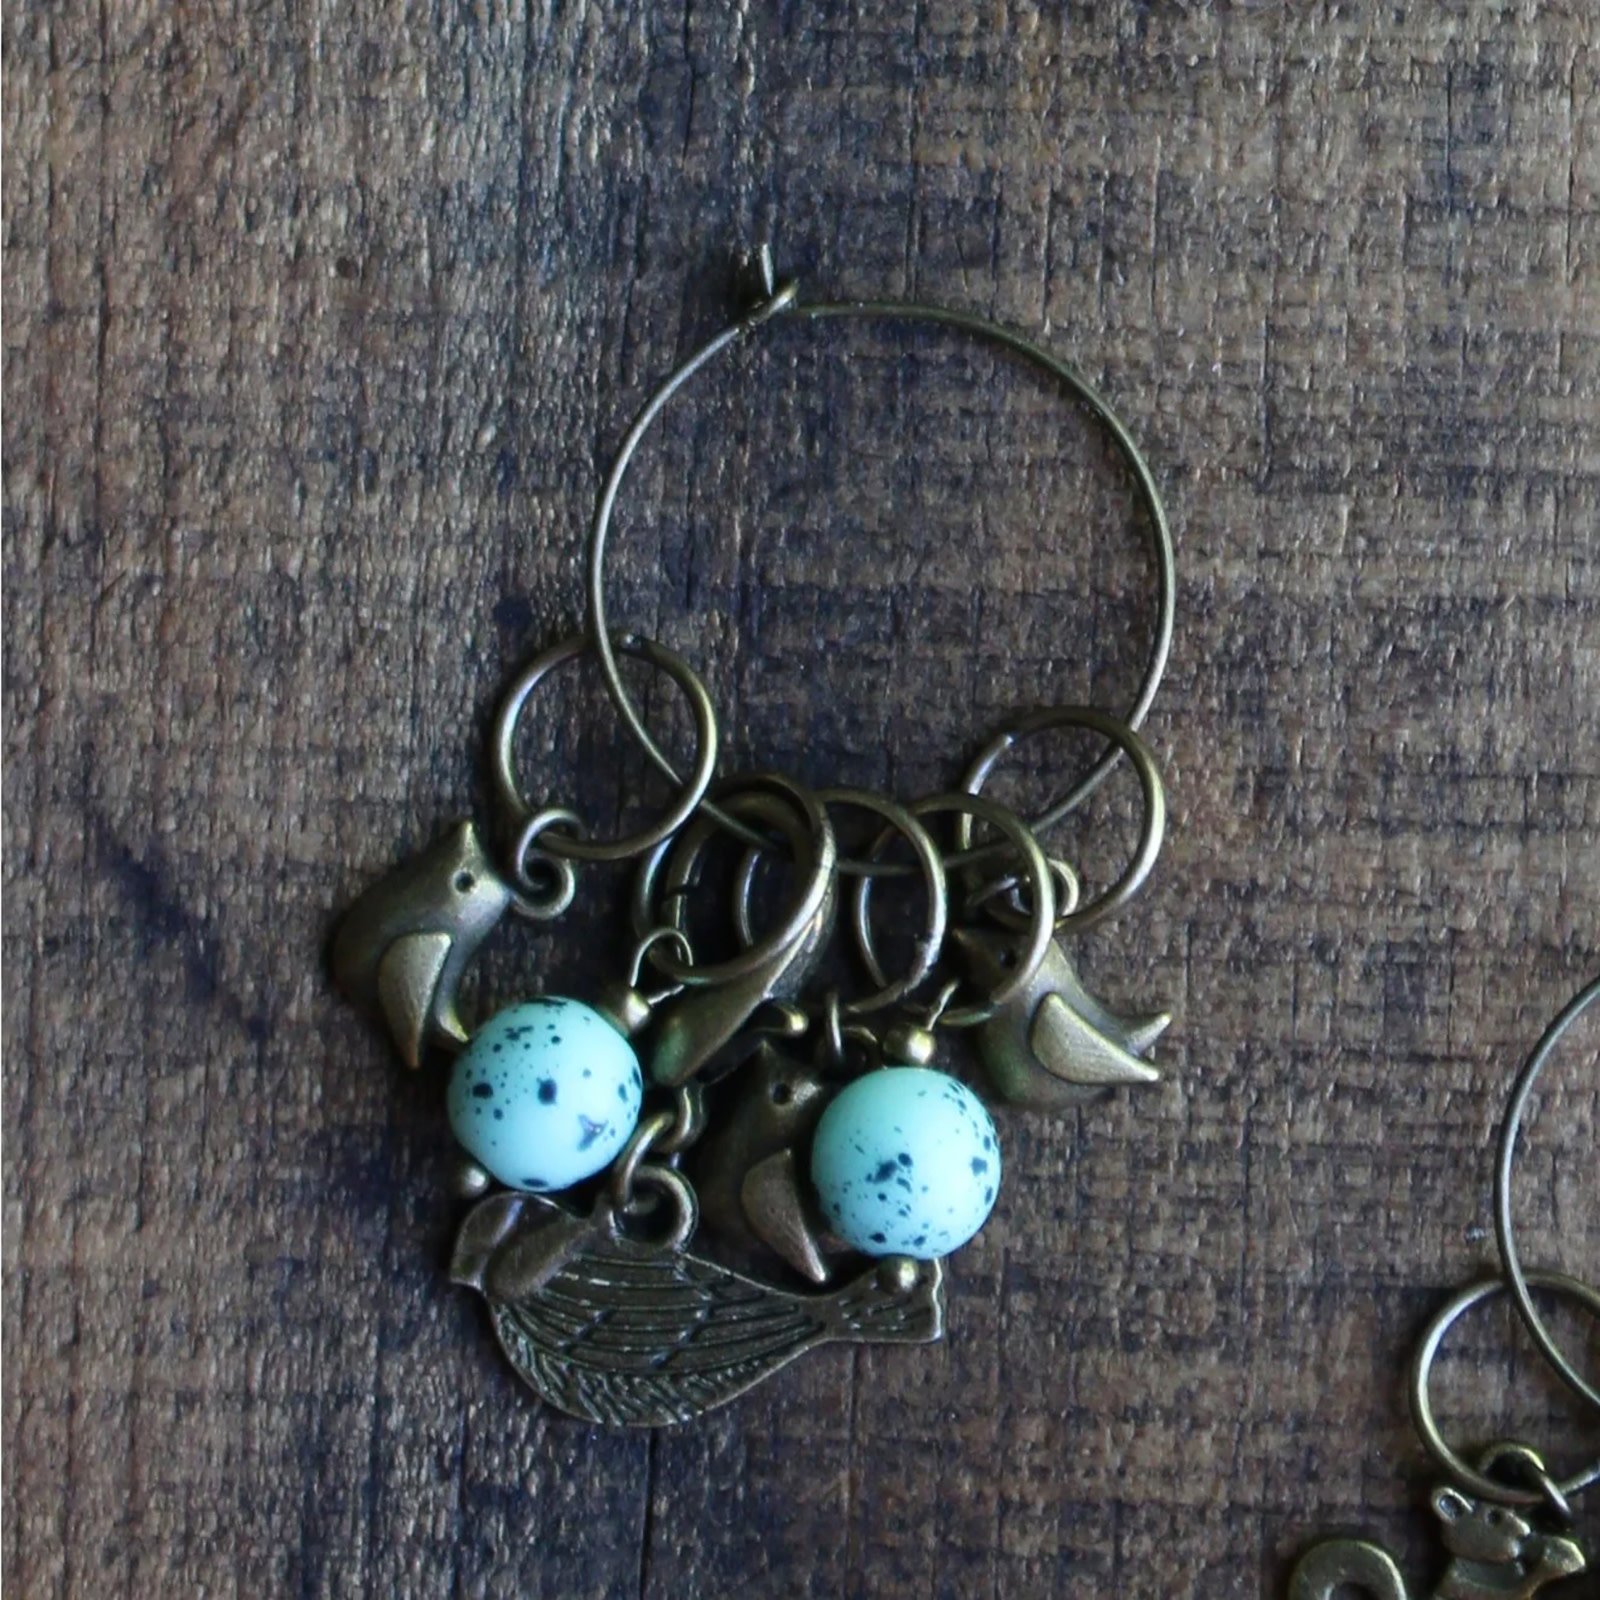 Stitch Markers - Sealed with a Kiss